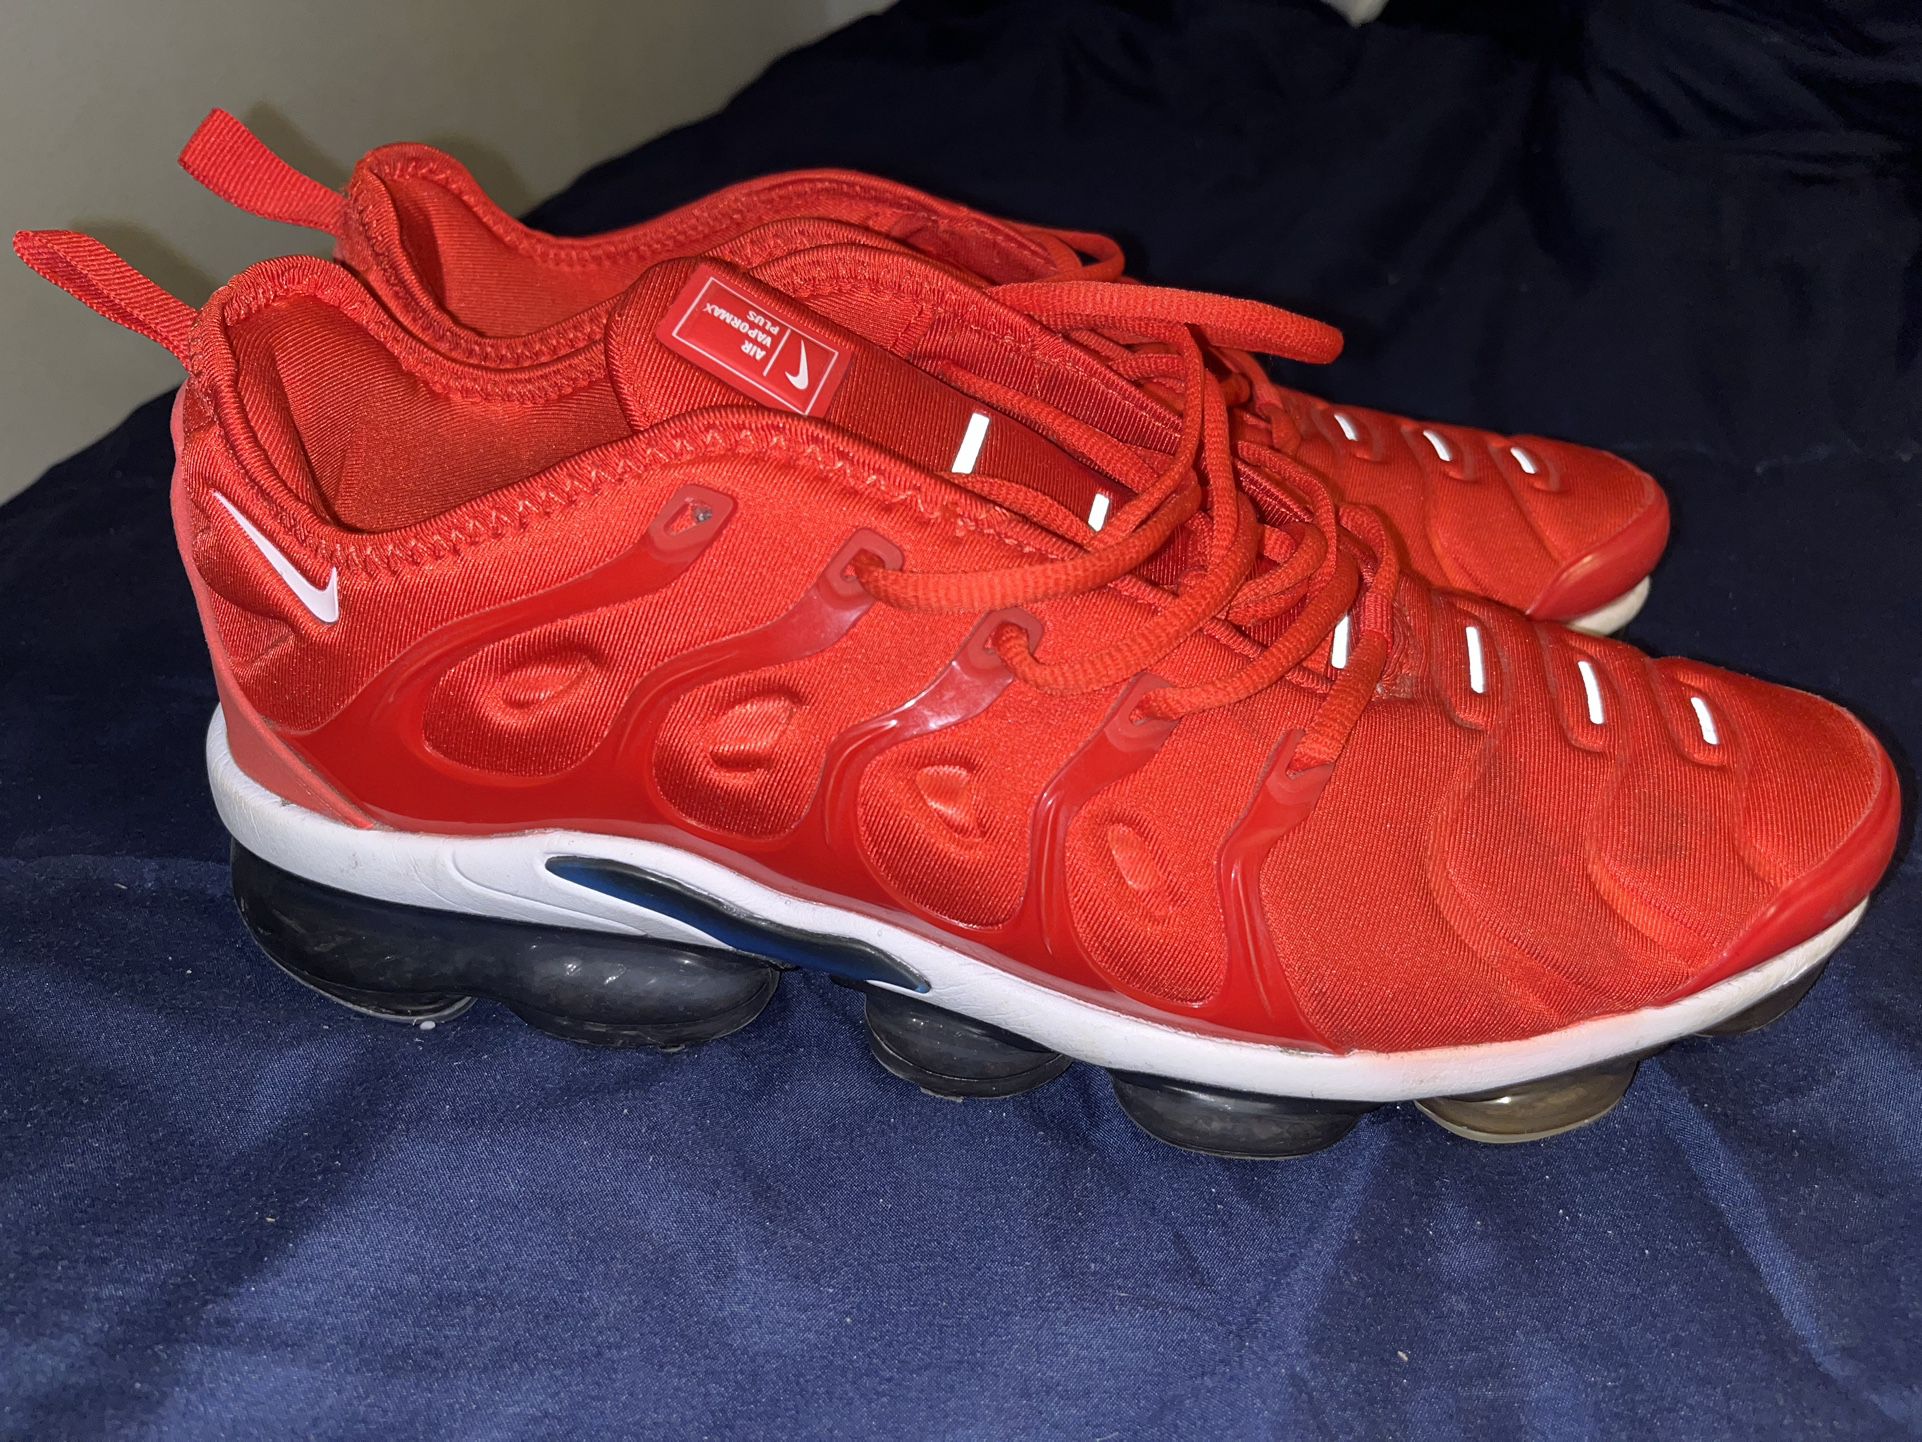 Nike Air Vapormax Plus USA 2018 Size 12 for Sale in Vero Beach, - OfferUp